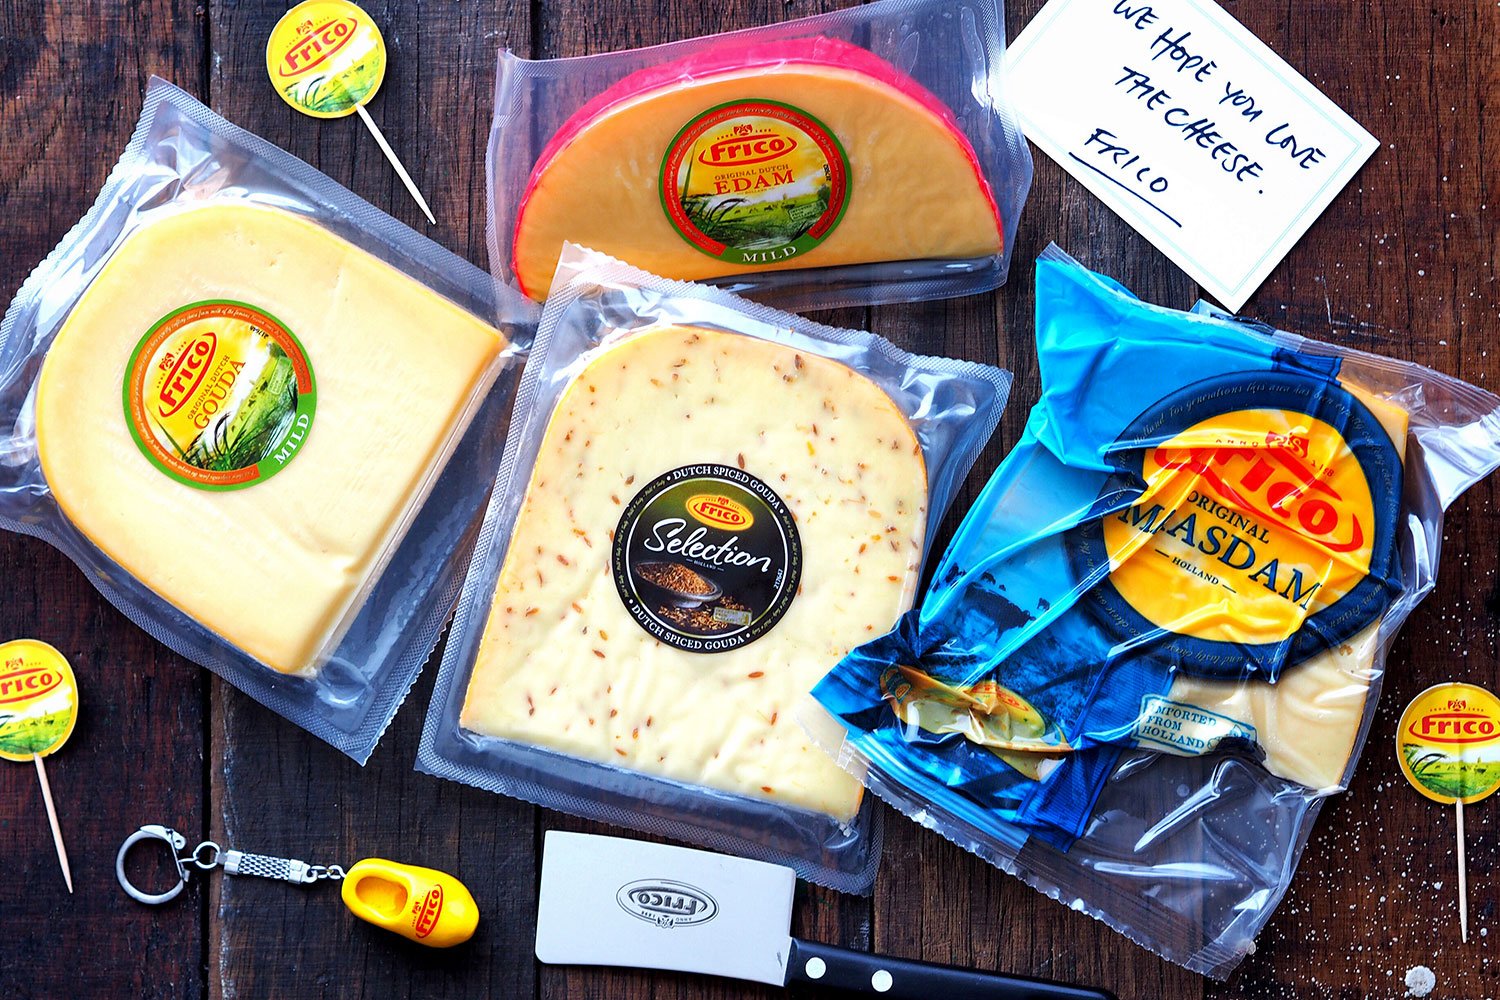 Sydney Food Blog Review of Frico Cheese